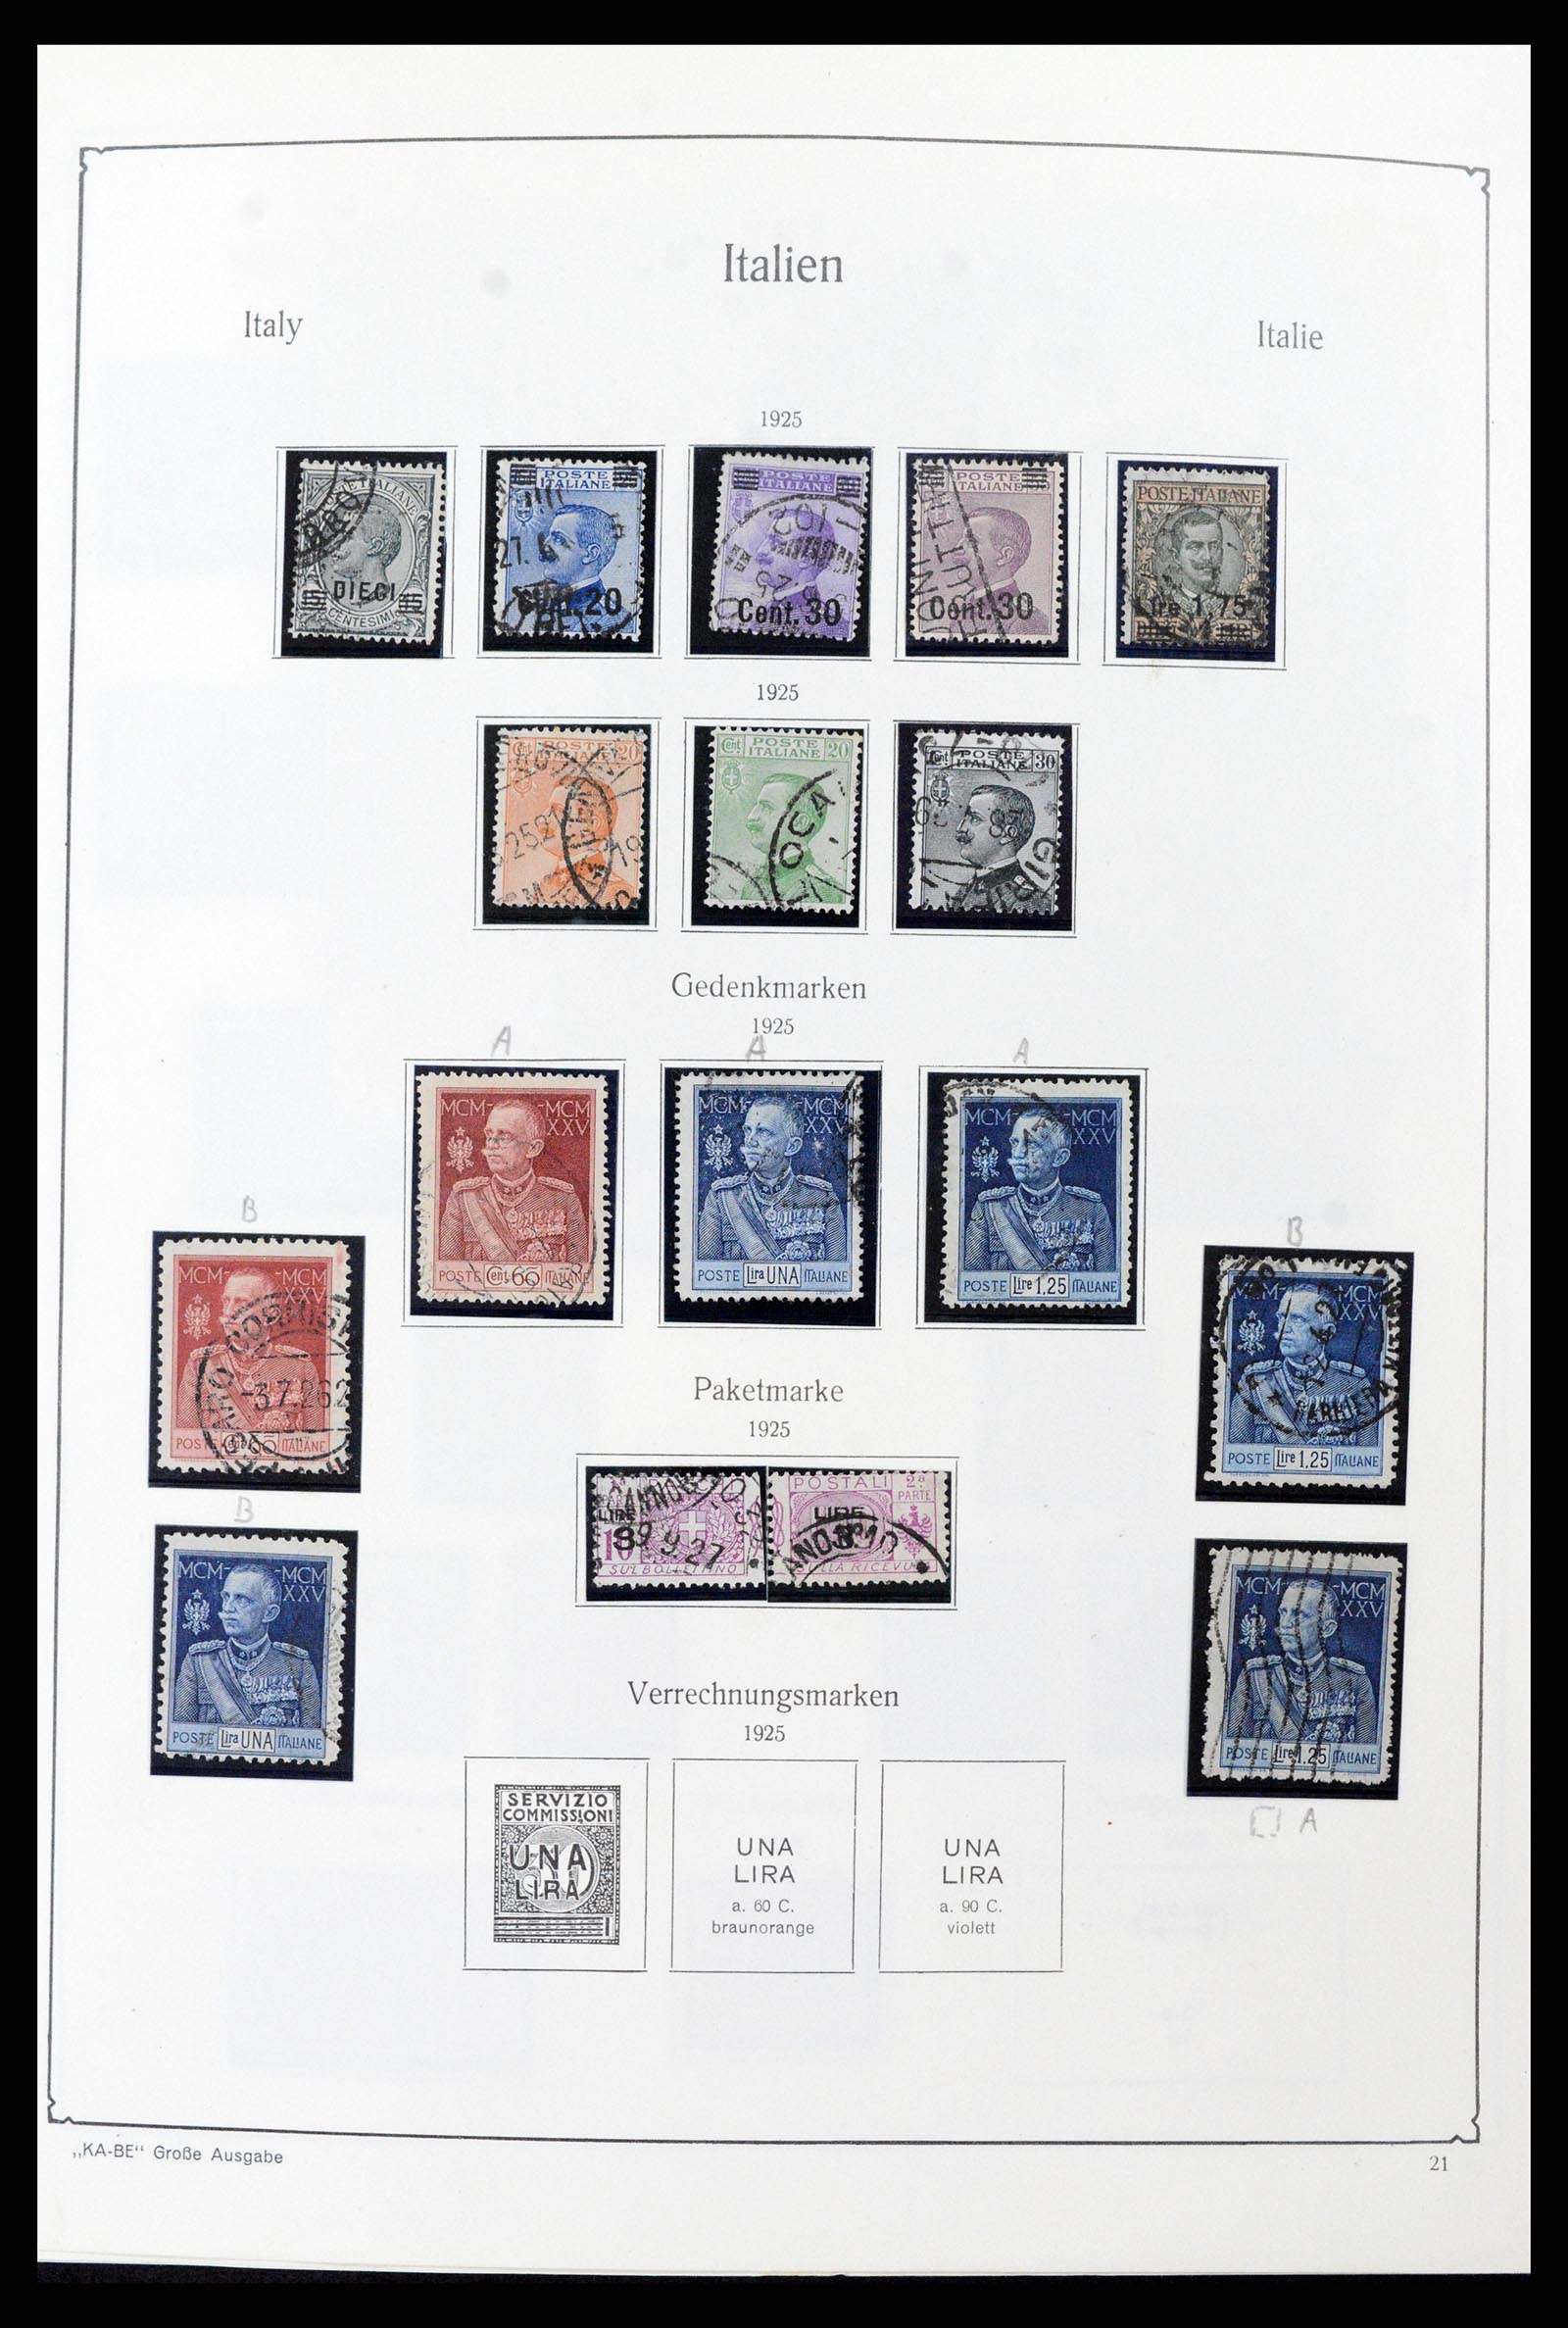 37605 037 - Stamp collection 37605 Italy and States 1855-1974.